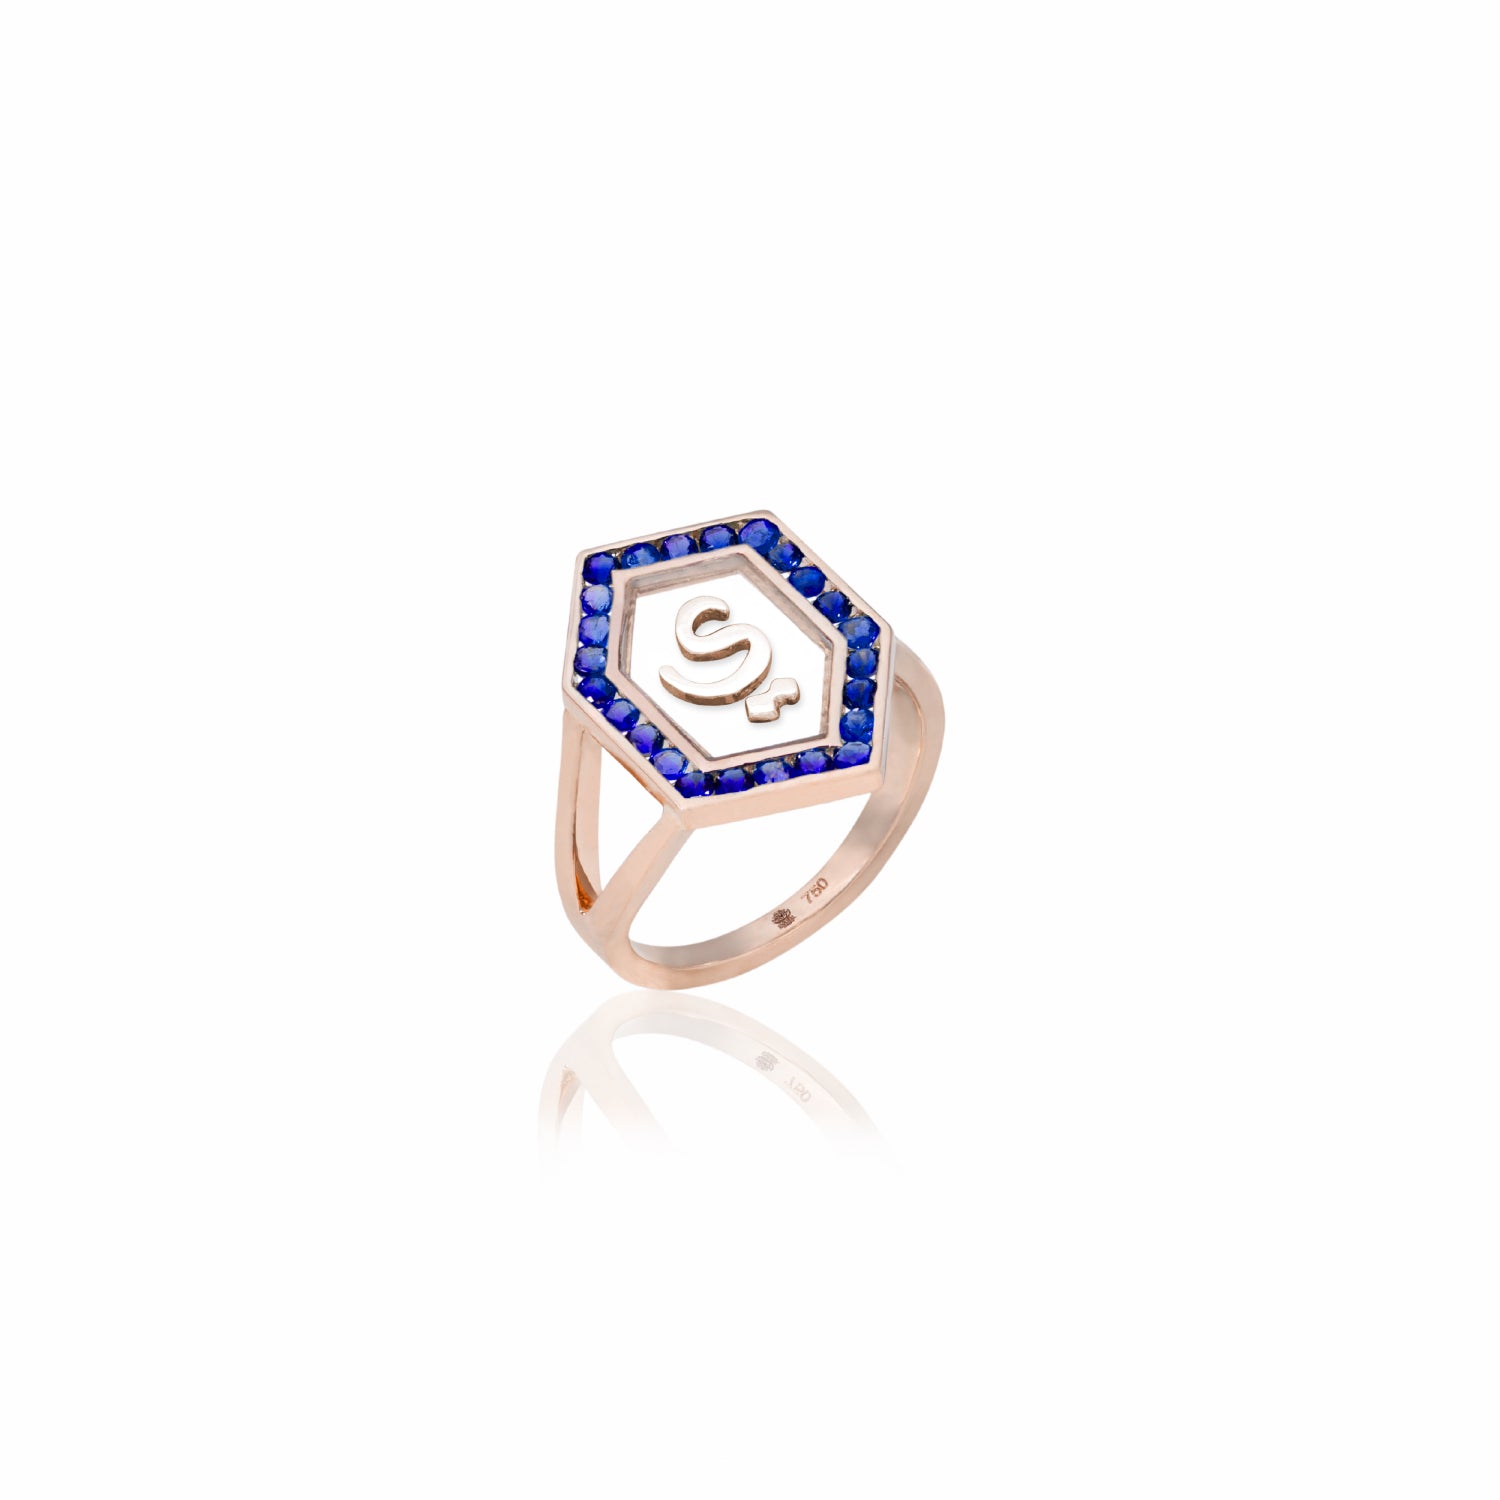 Qamoos 1.0 Letter ي Sapphire Ring in Rose Gold